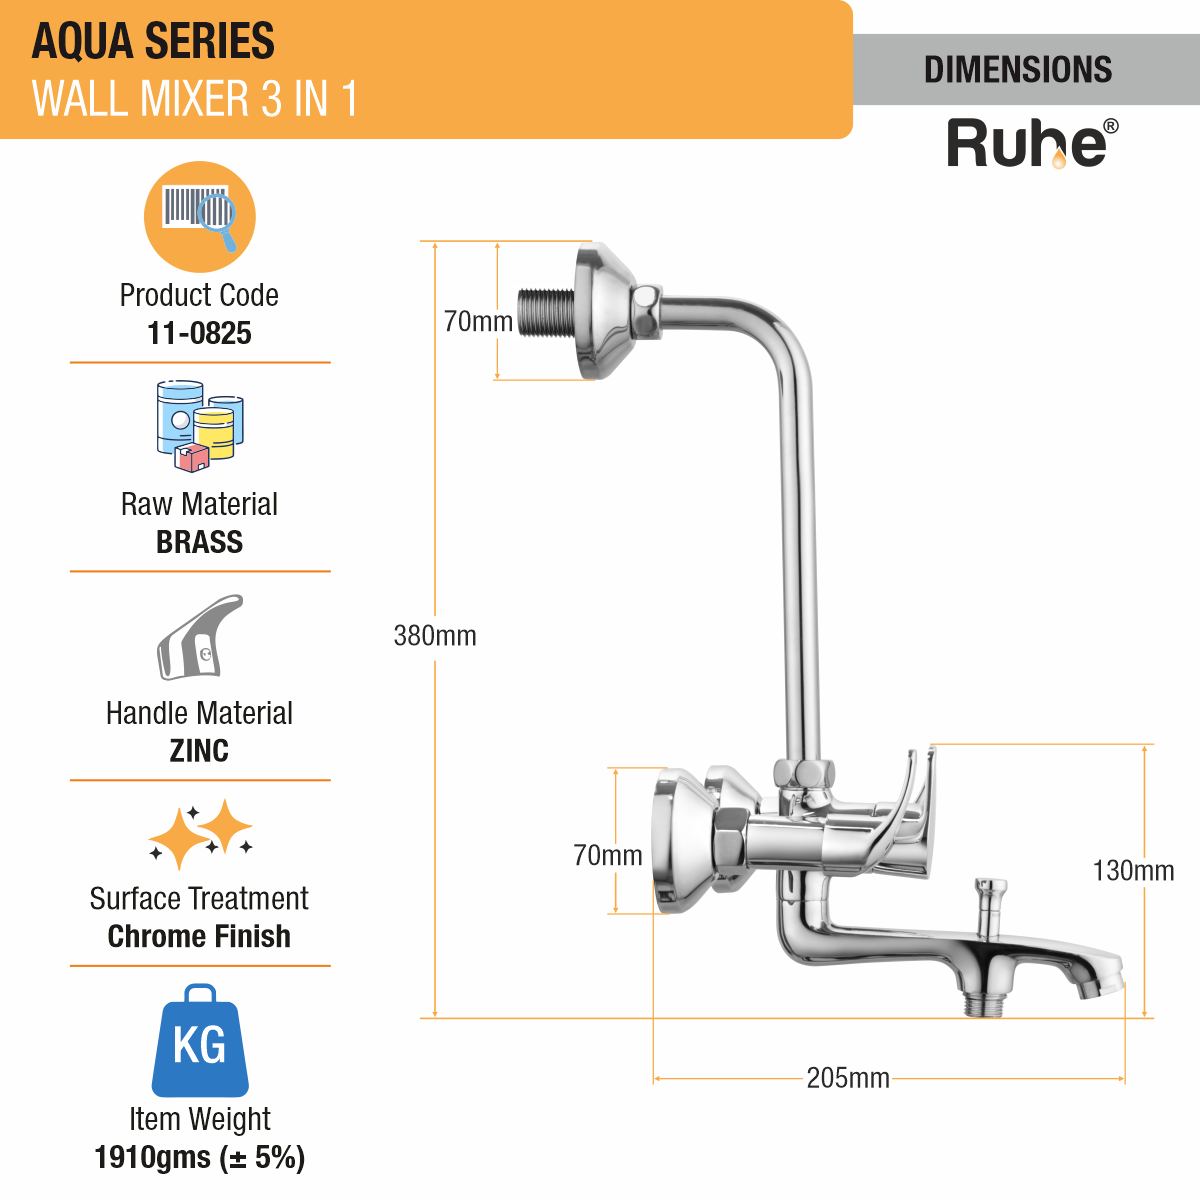 Aqua Wall Mixer 3-in-1 Brass Faucet dimensions and size